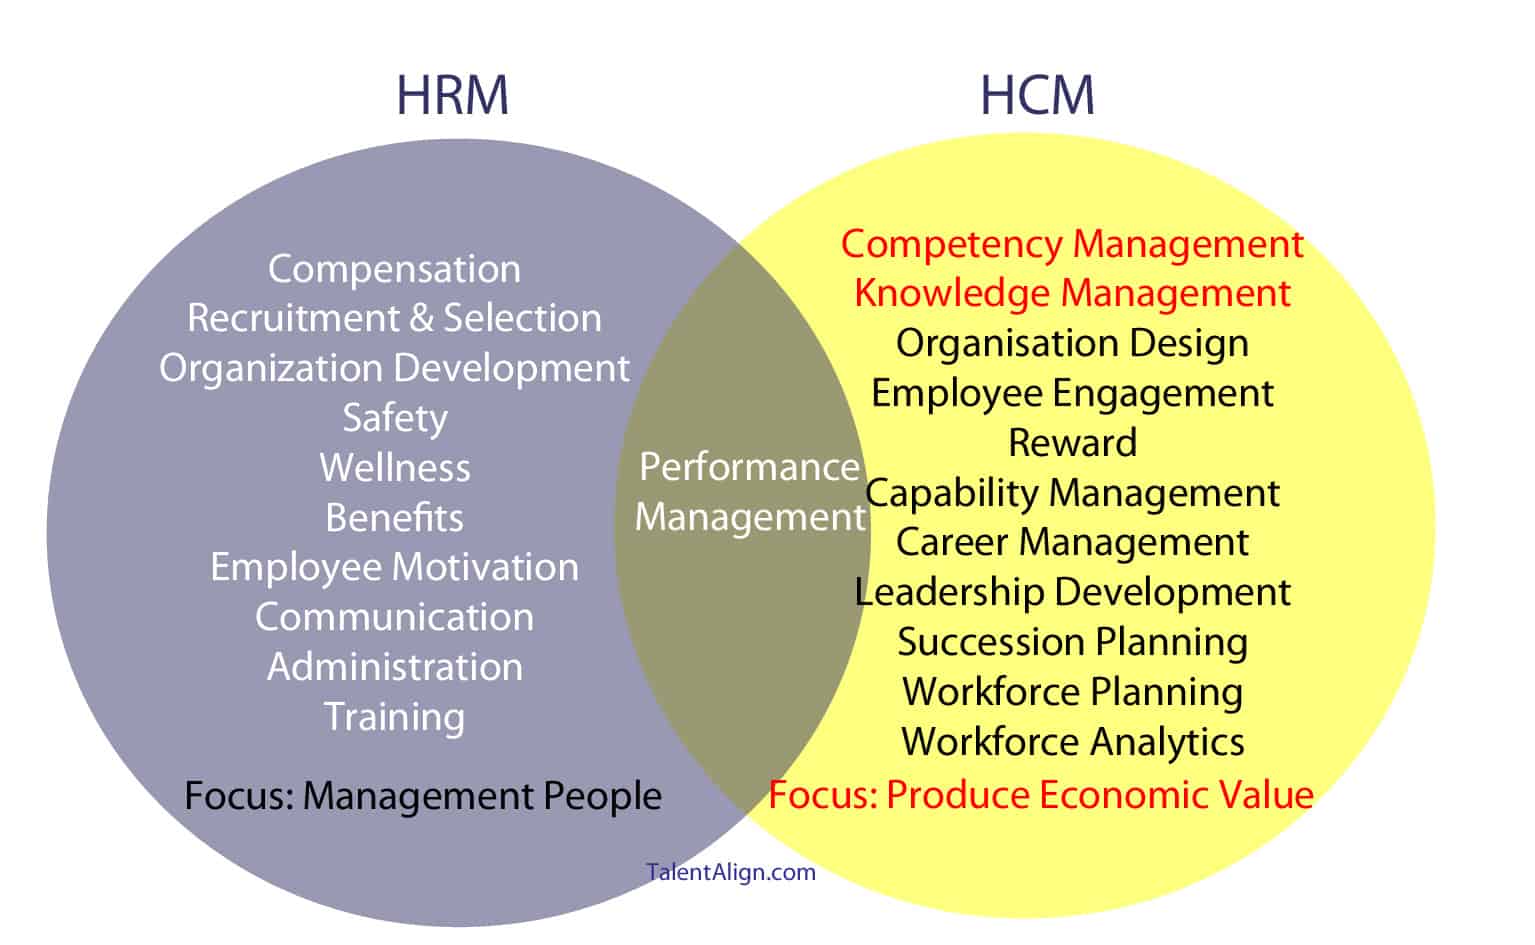 HCM and HRM